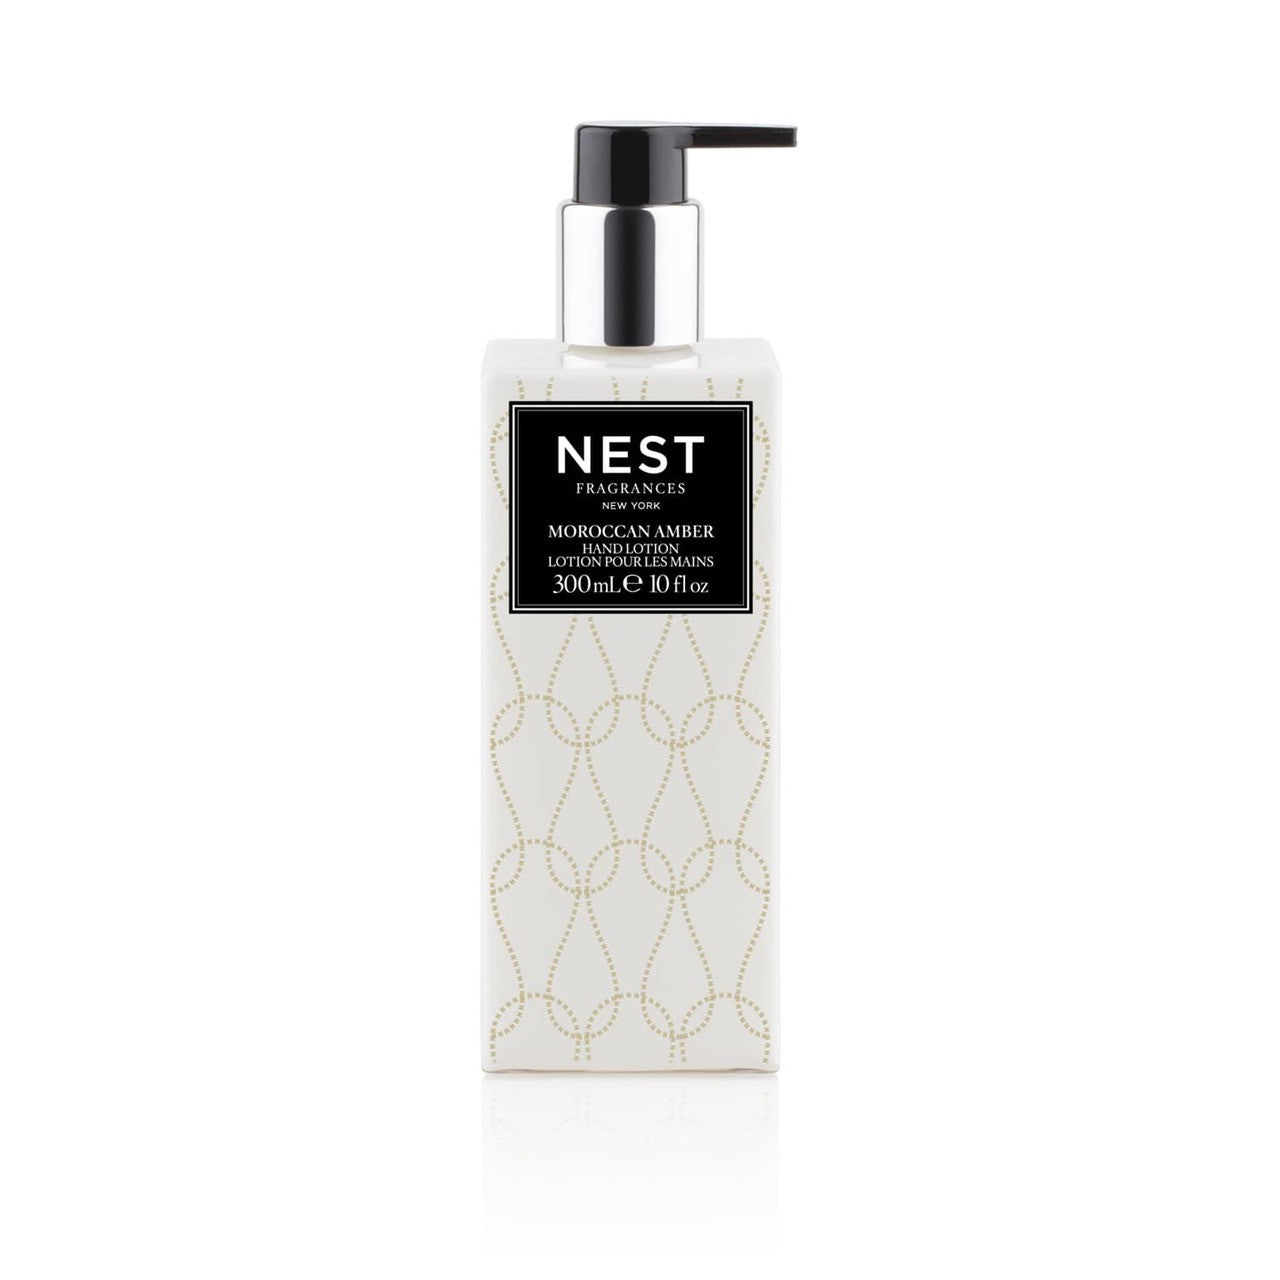 Nest Fragrances Moroccan Amber Hand Lotion